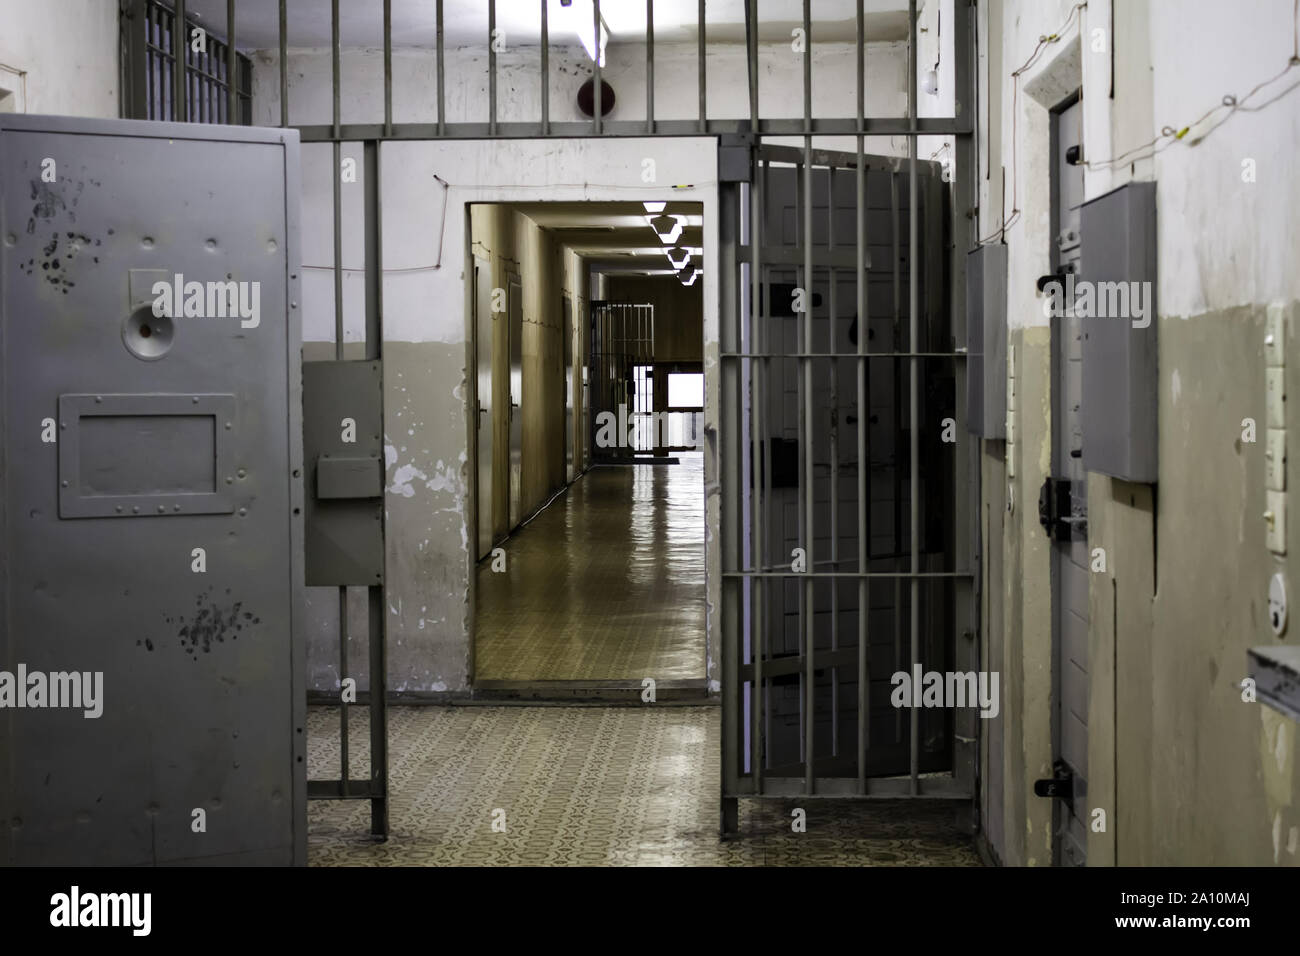 Penitentiary jail with cells, deprivation of liberty, arrests Stock Photo